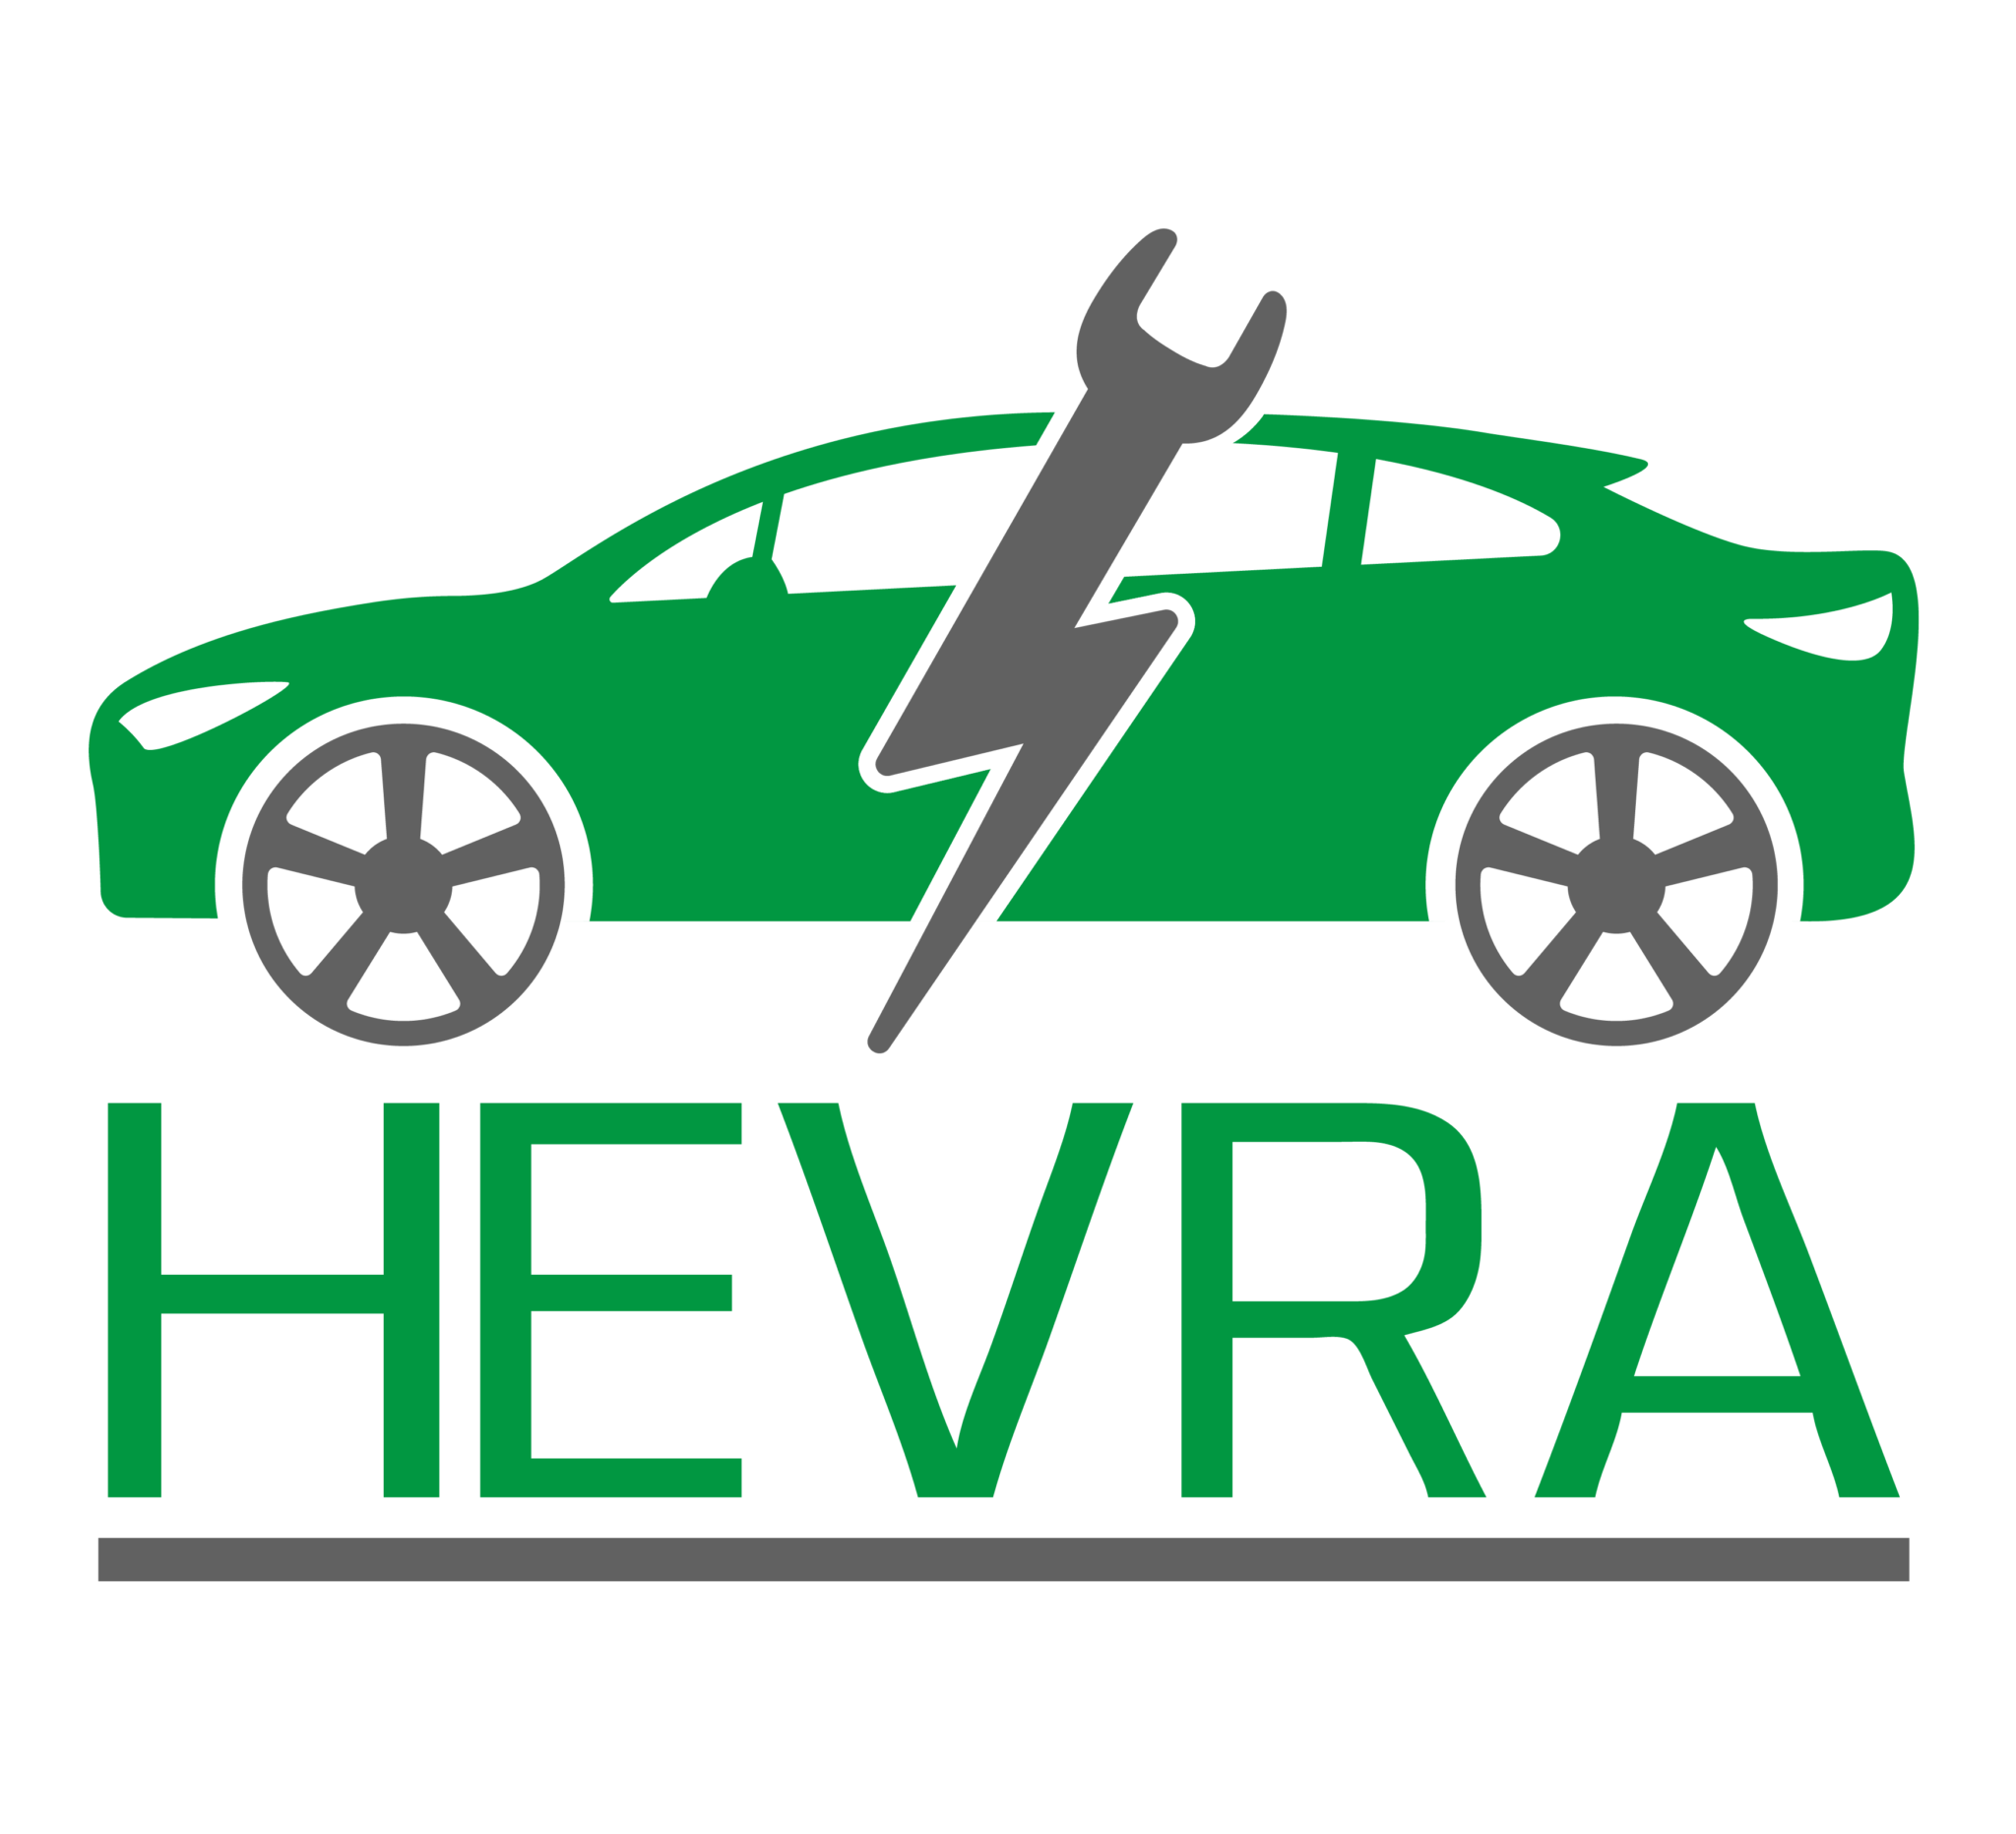 HEVRA expands EV maintenance data support to Dacia, now covers 40 brands